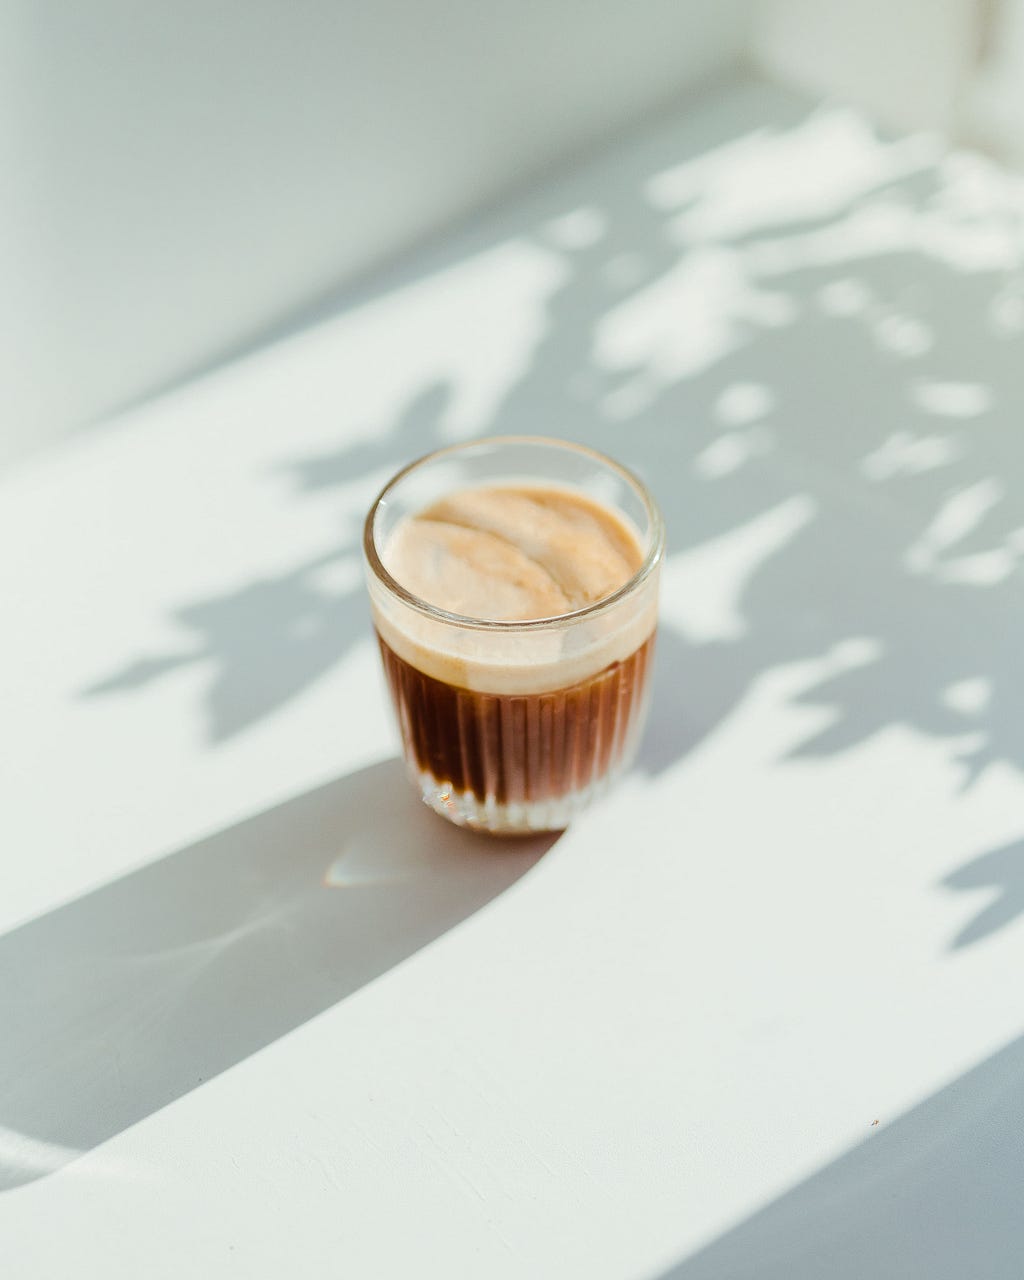 A glass of coffee with thick crema on a white table.